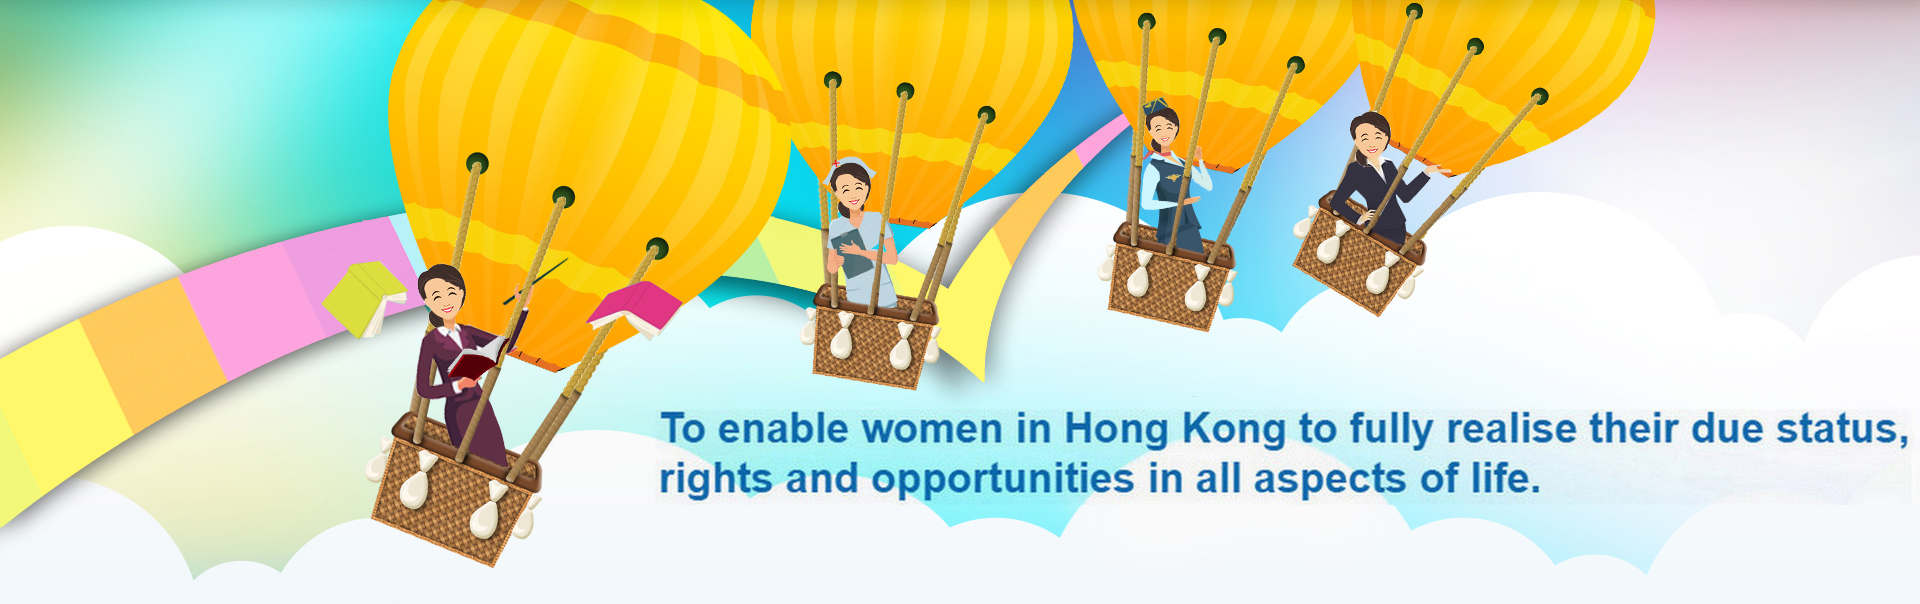 To enable women in Hong Kong to fully realise their due status, rights and opportunities in all aspects of life.